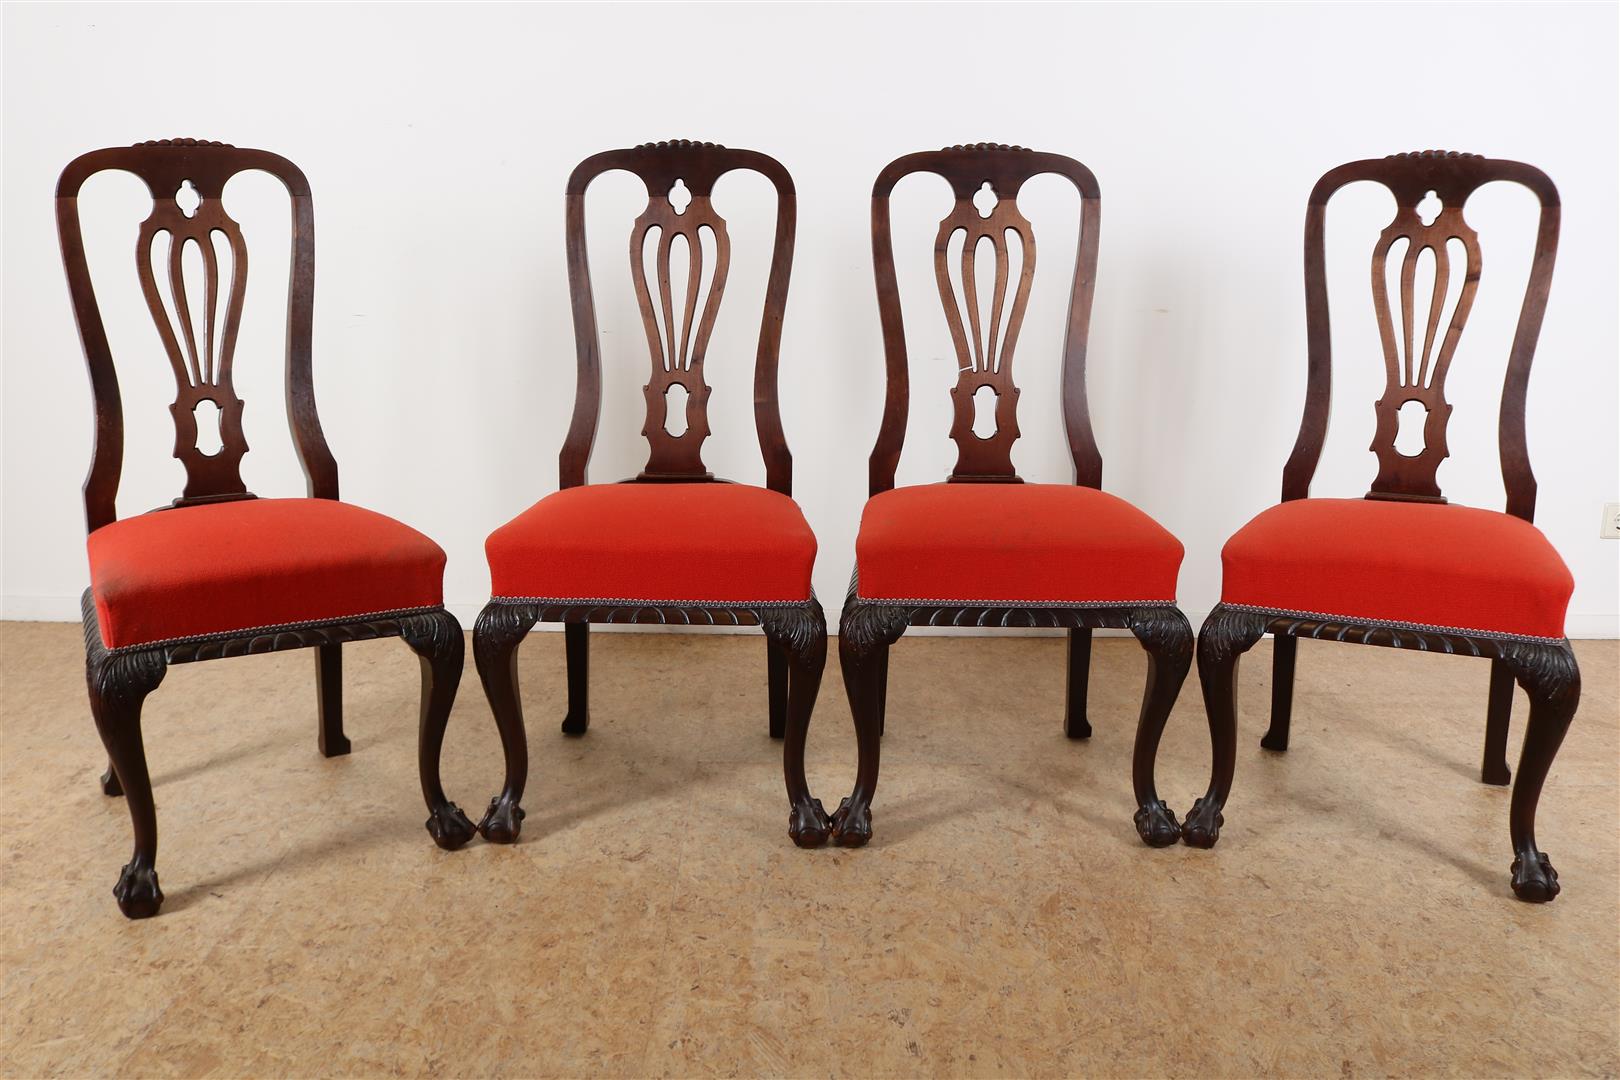 Series of 4 Chippendale-style chairs with elaborate backrest, red fabric seat on ball claw feet,